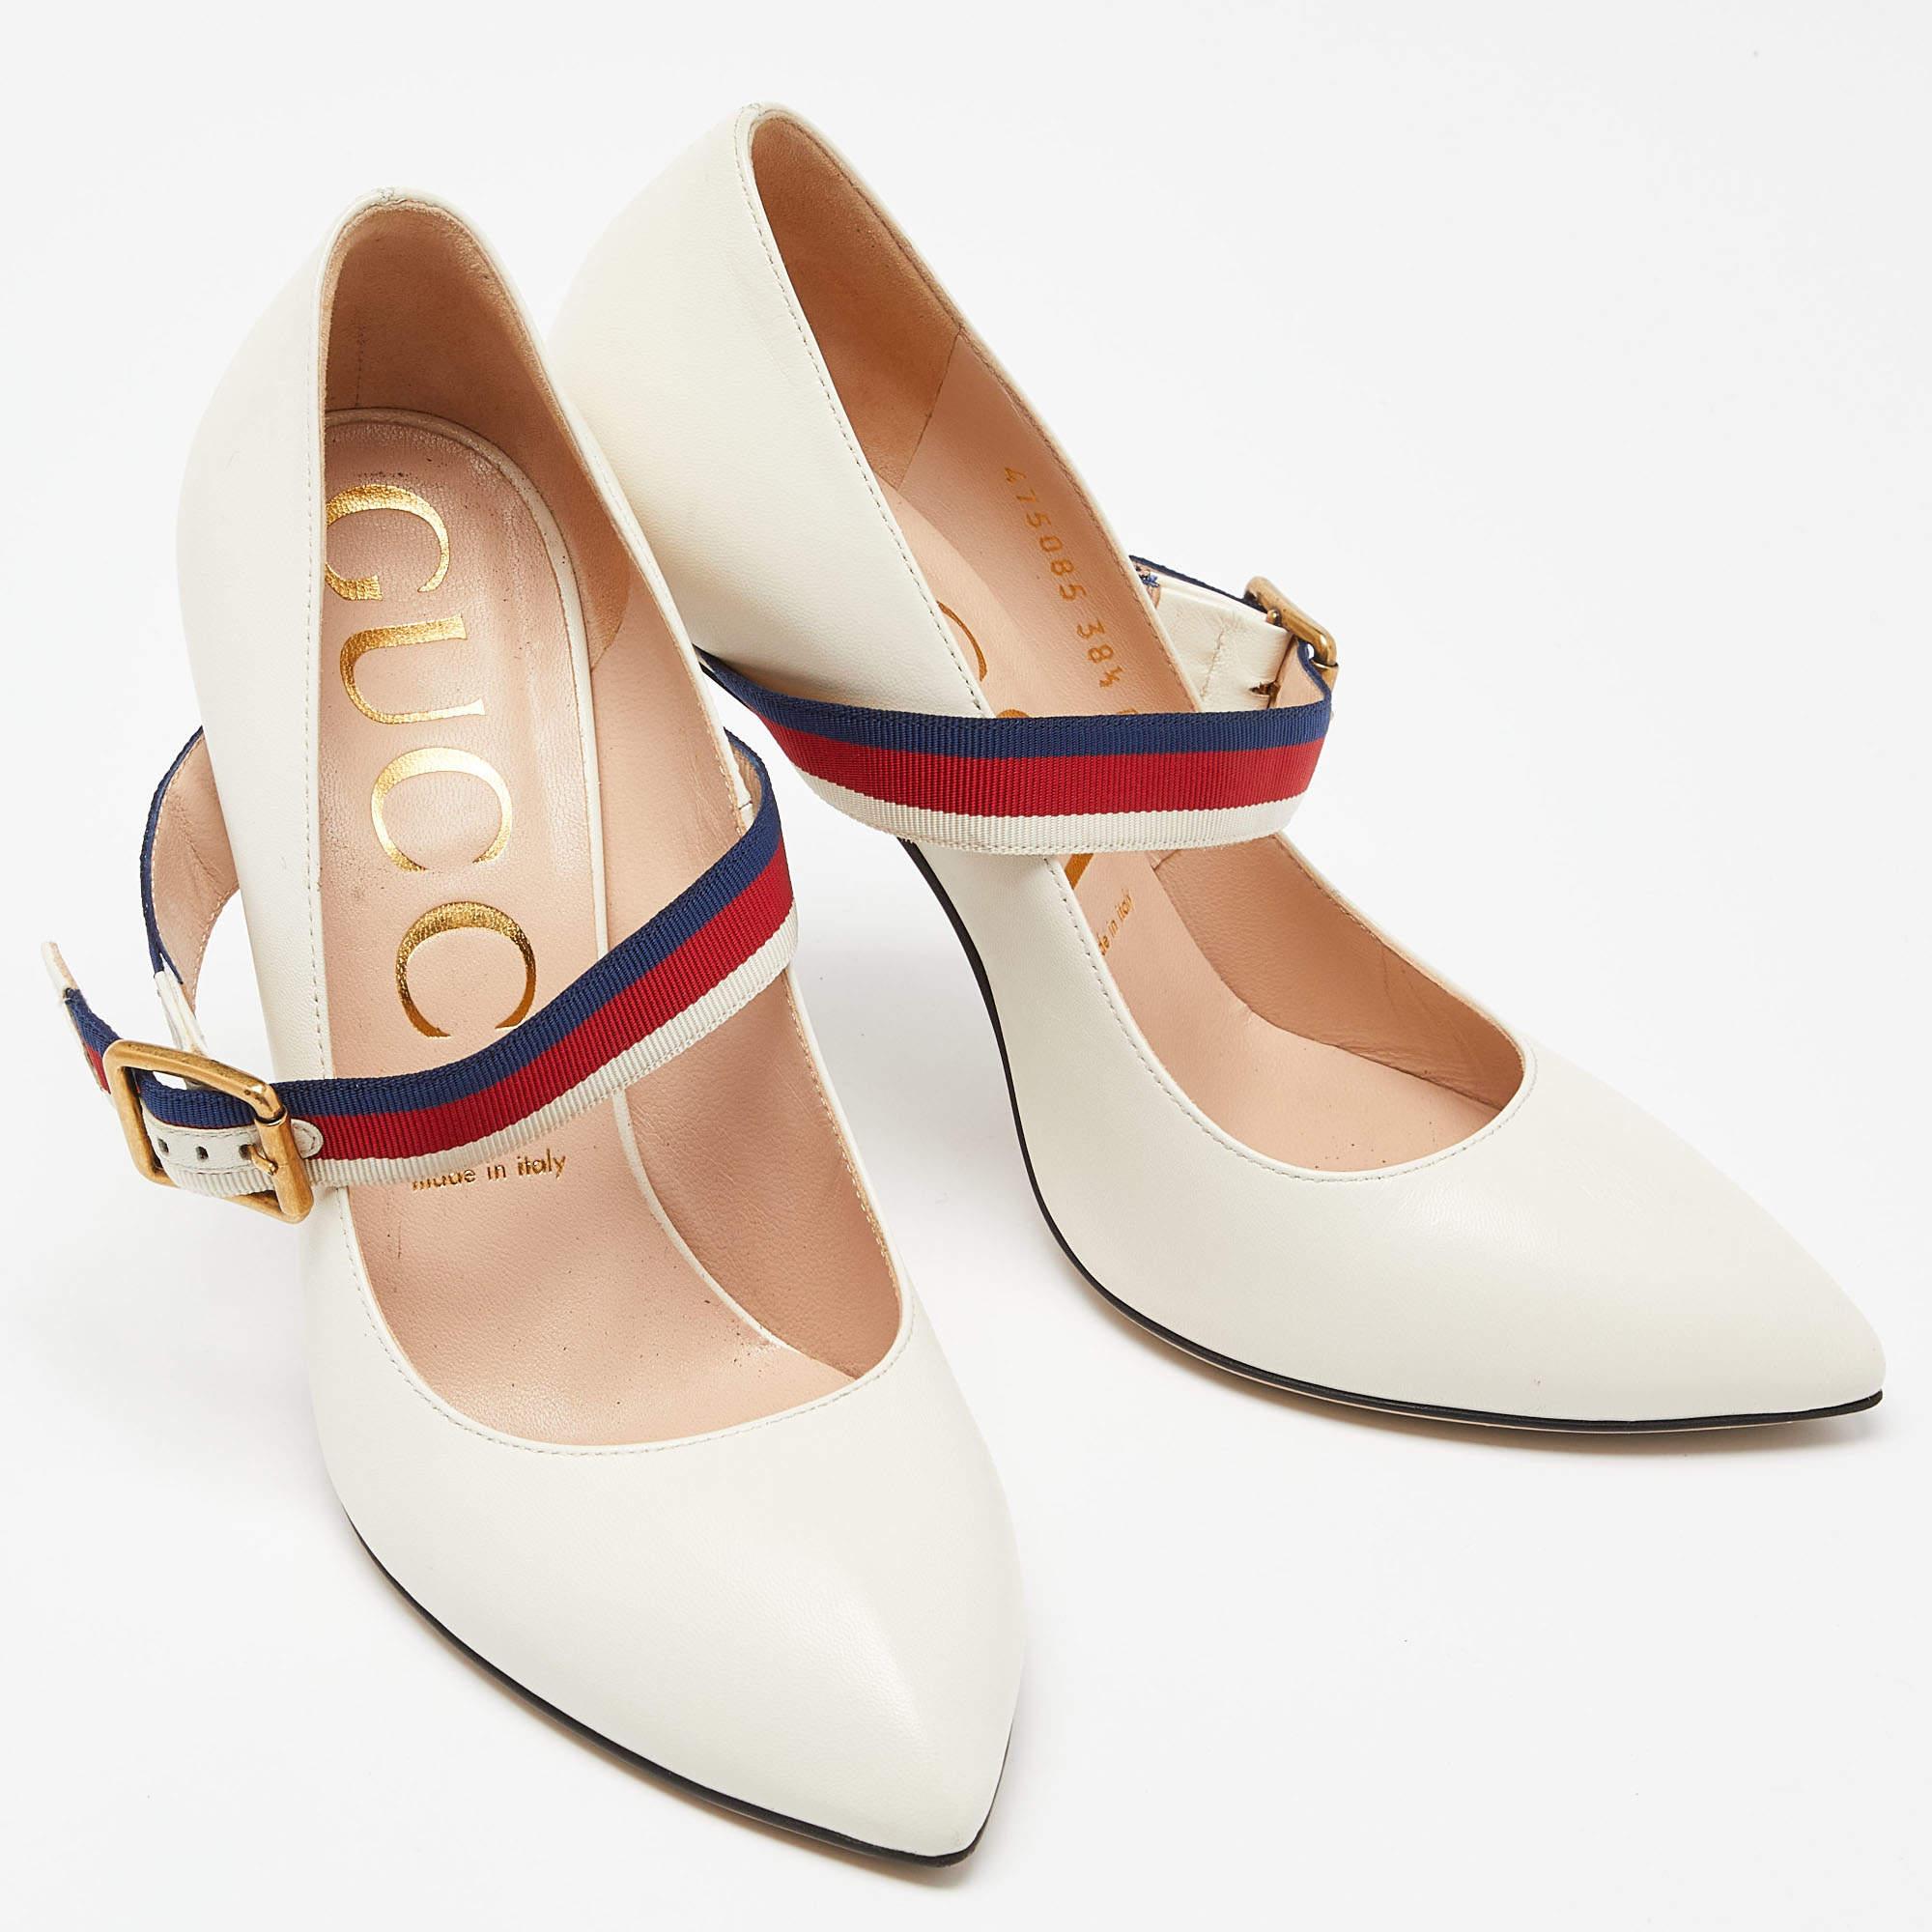 Gucci Cream Leather Sylvie Mary Jane Pumps Size 38.5 For Sale 1